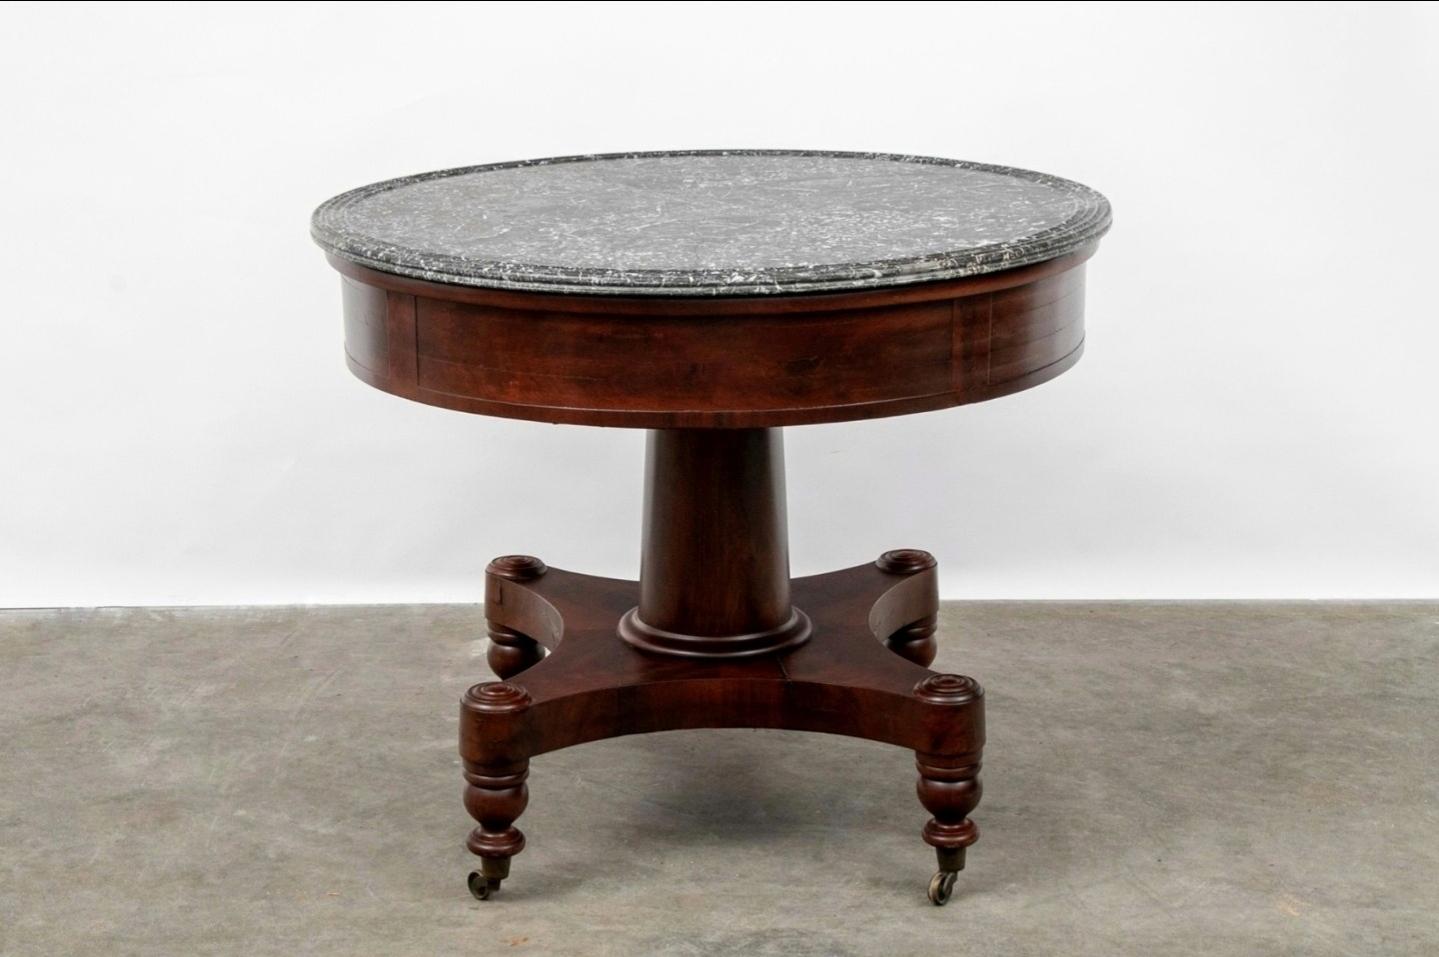 Antique American Boston Classical Mahogany Pedestal Center Table  In Good Condition For Sale In Forney, TX